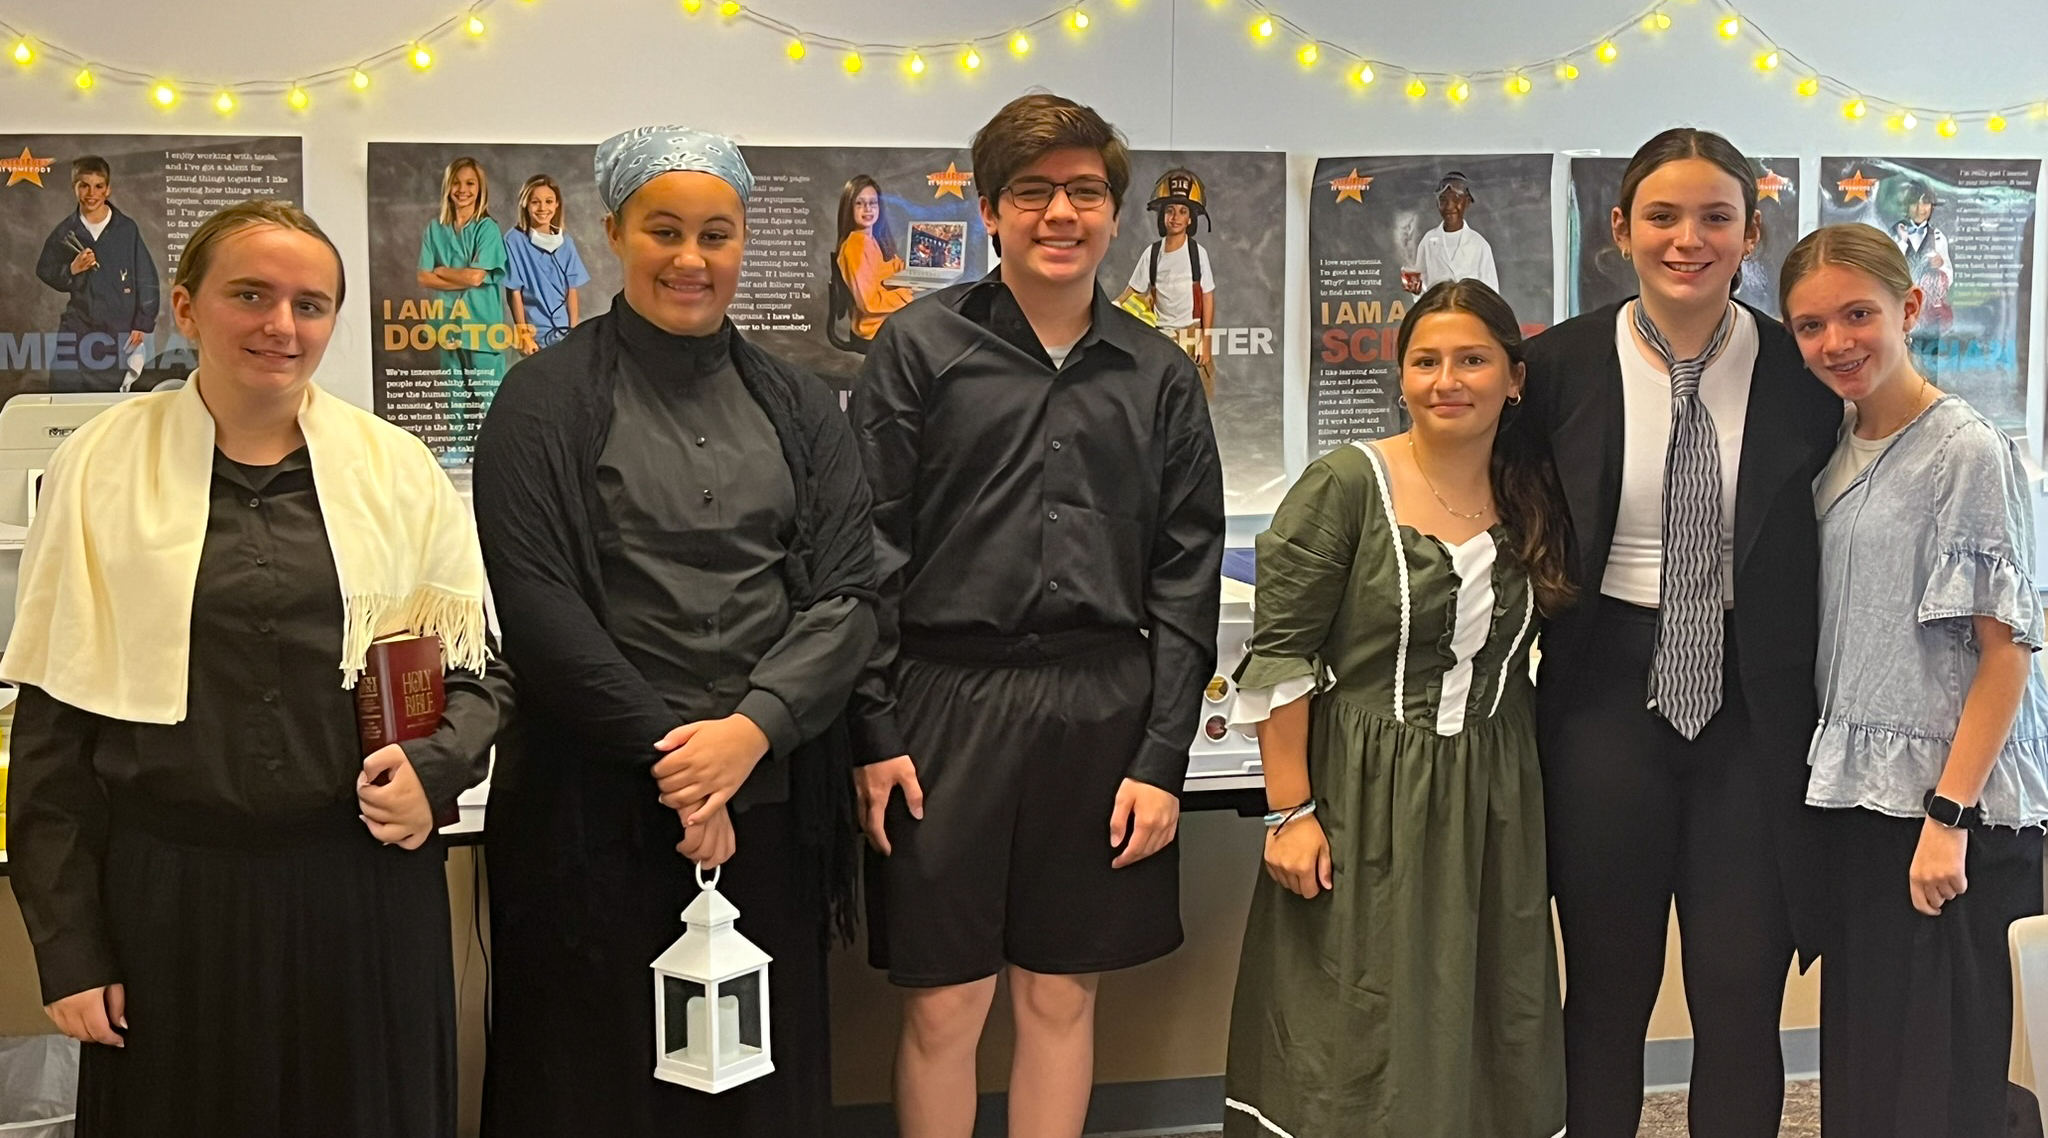 Six middle school students dressed as historical figures. One is holding a bible; another is holding a lantern.